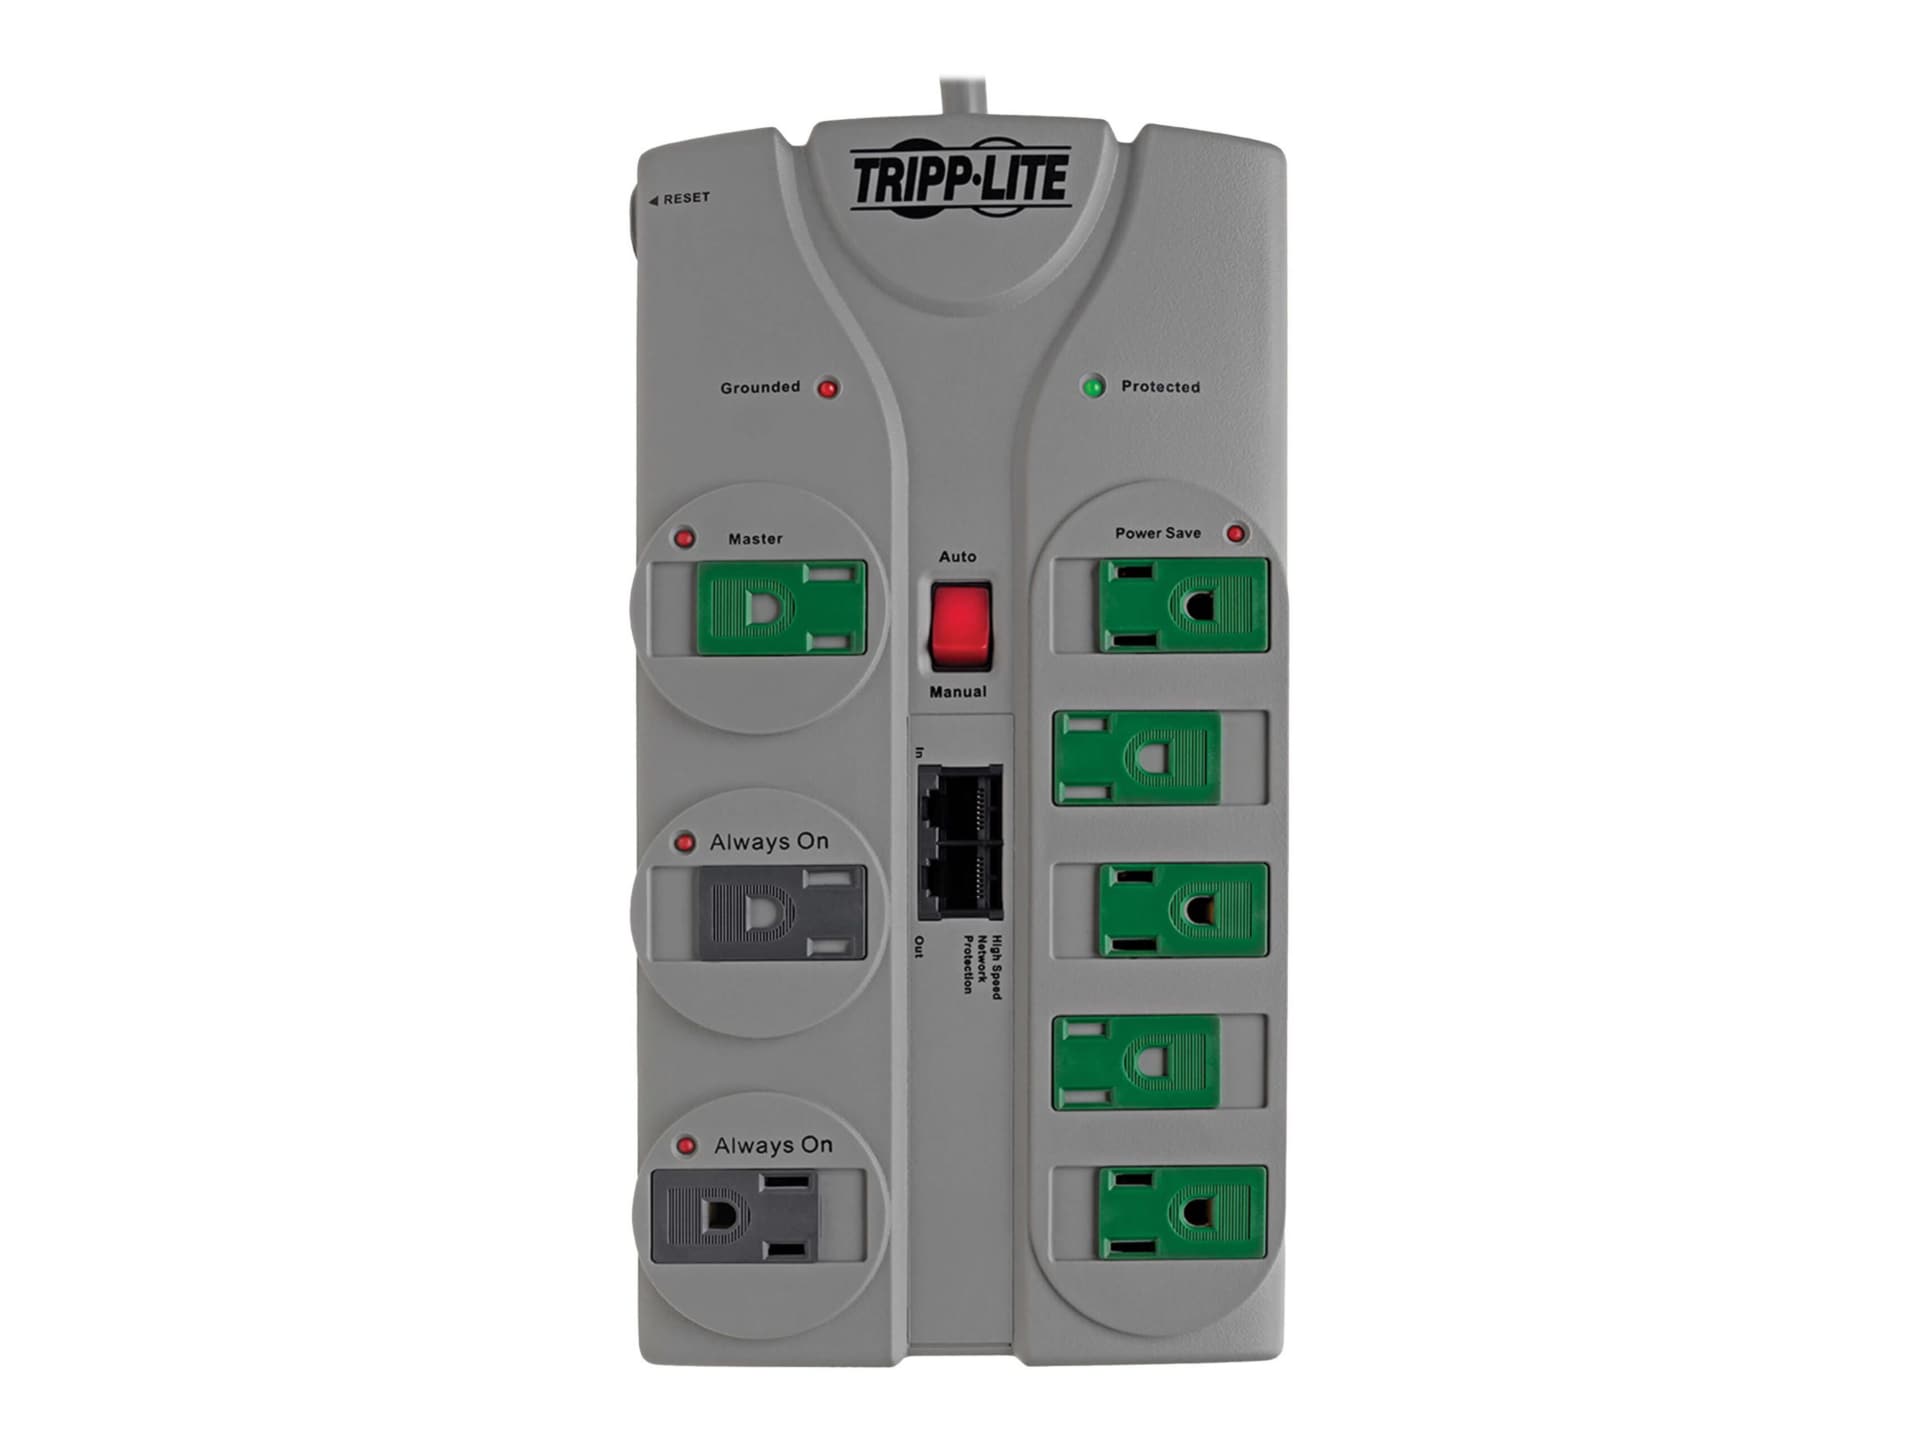 Tripp Lite Eco Surge Protector Green 120V 8 Outlet RJ45 8ft Cord 2160 Joule